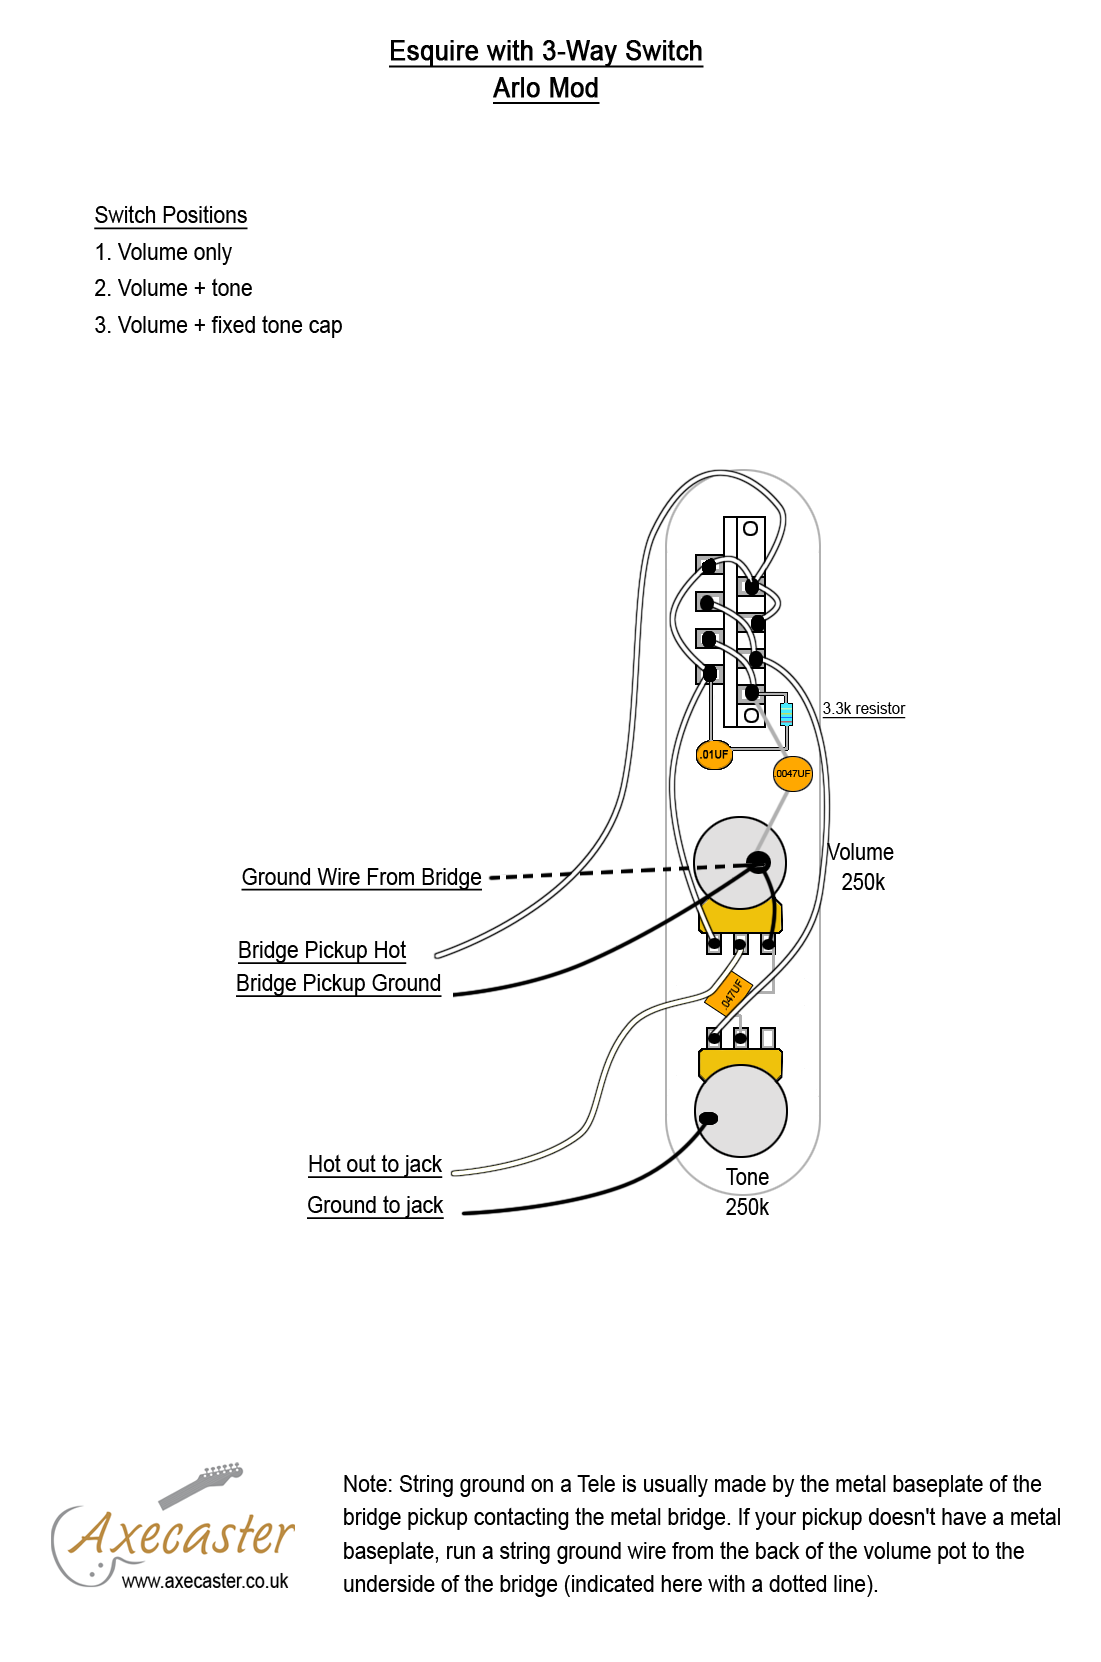 Esquire Wiring Diagram from www.axecaster.co.uk